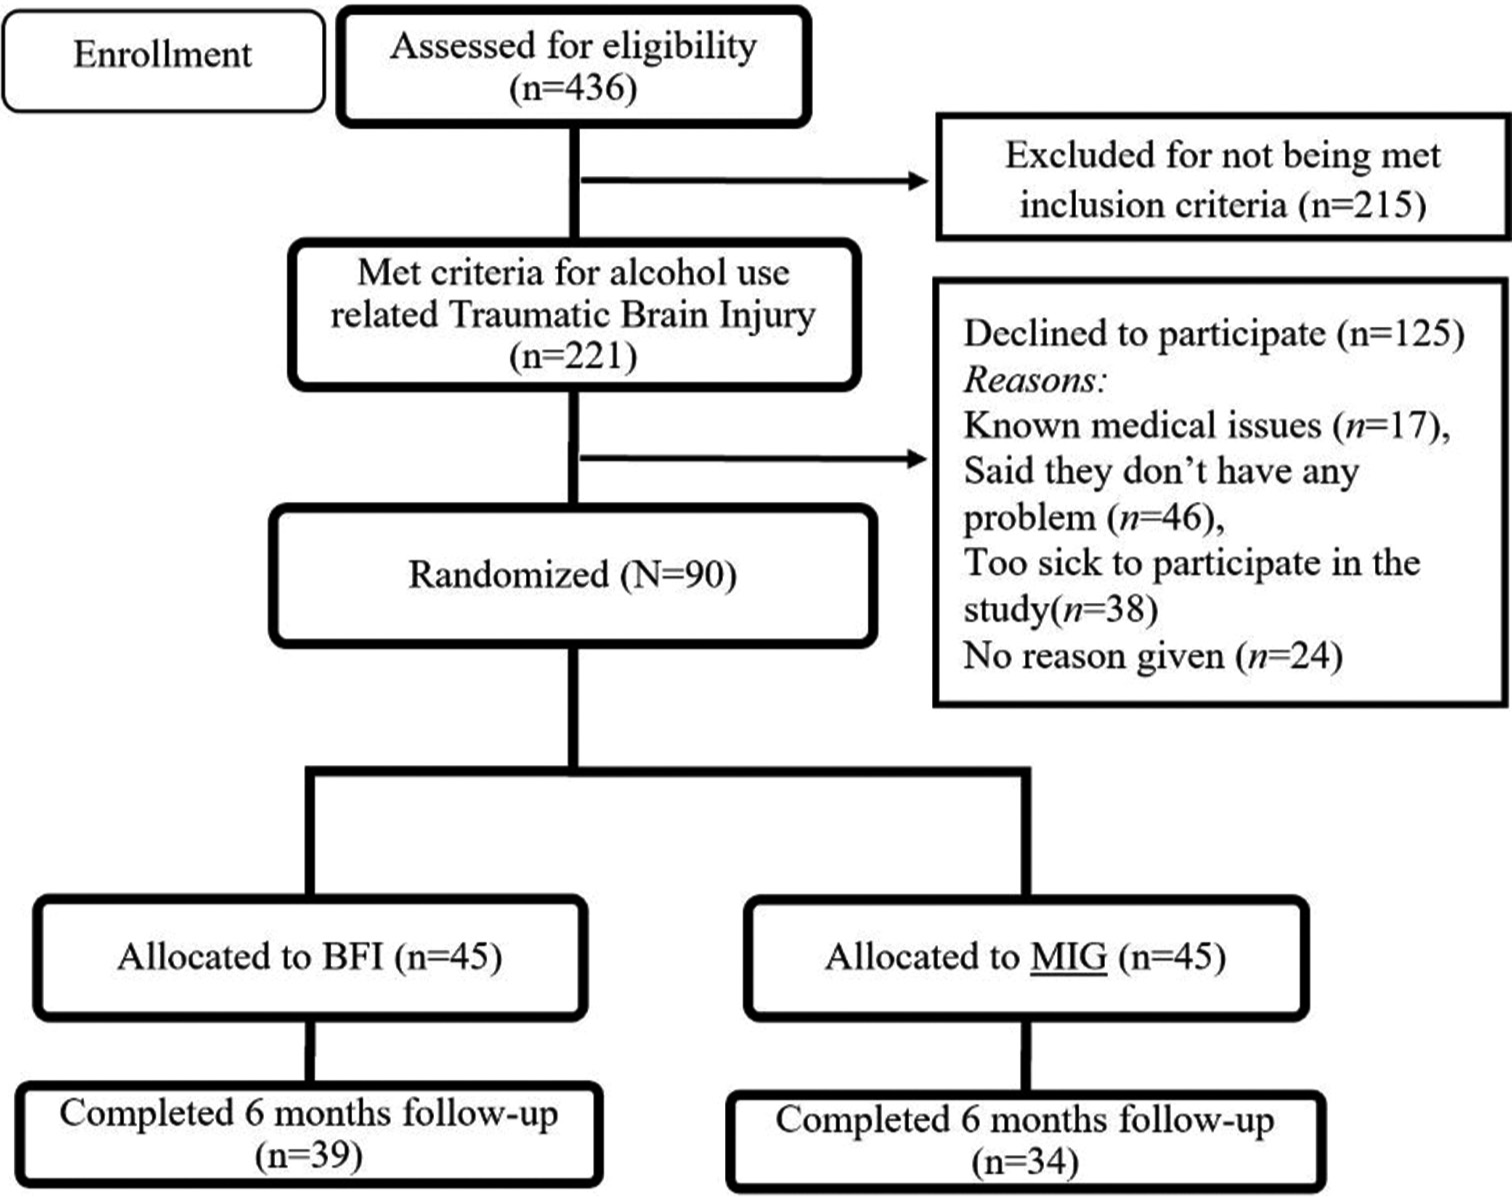 A randomized controlled trial of nurse-led Brief Focused Intervention for patients with alcohol use-related mild traumatic brain injury in the emergency and casualty services of a tertiary hospital